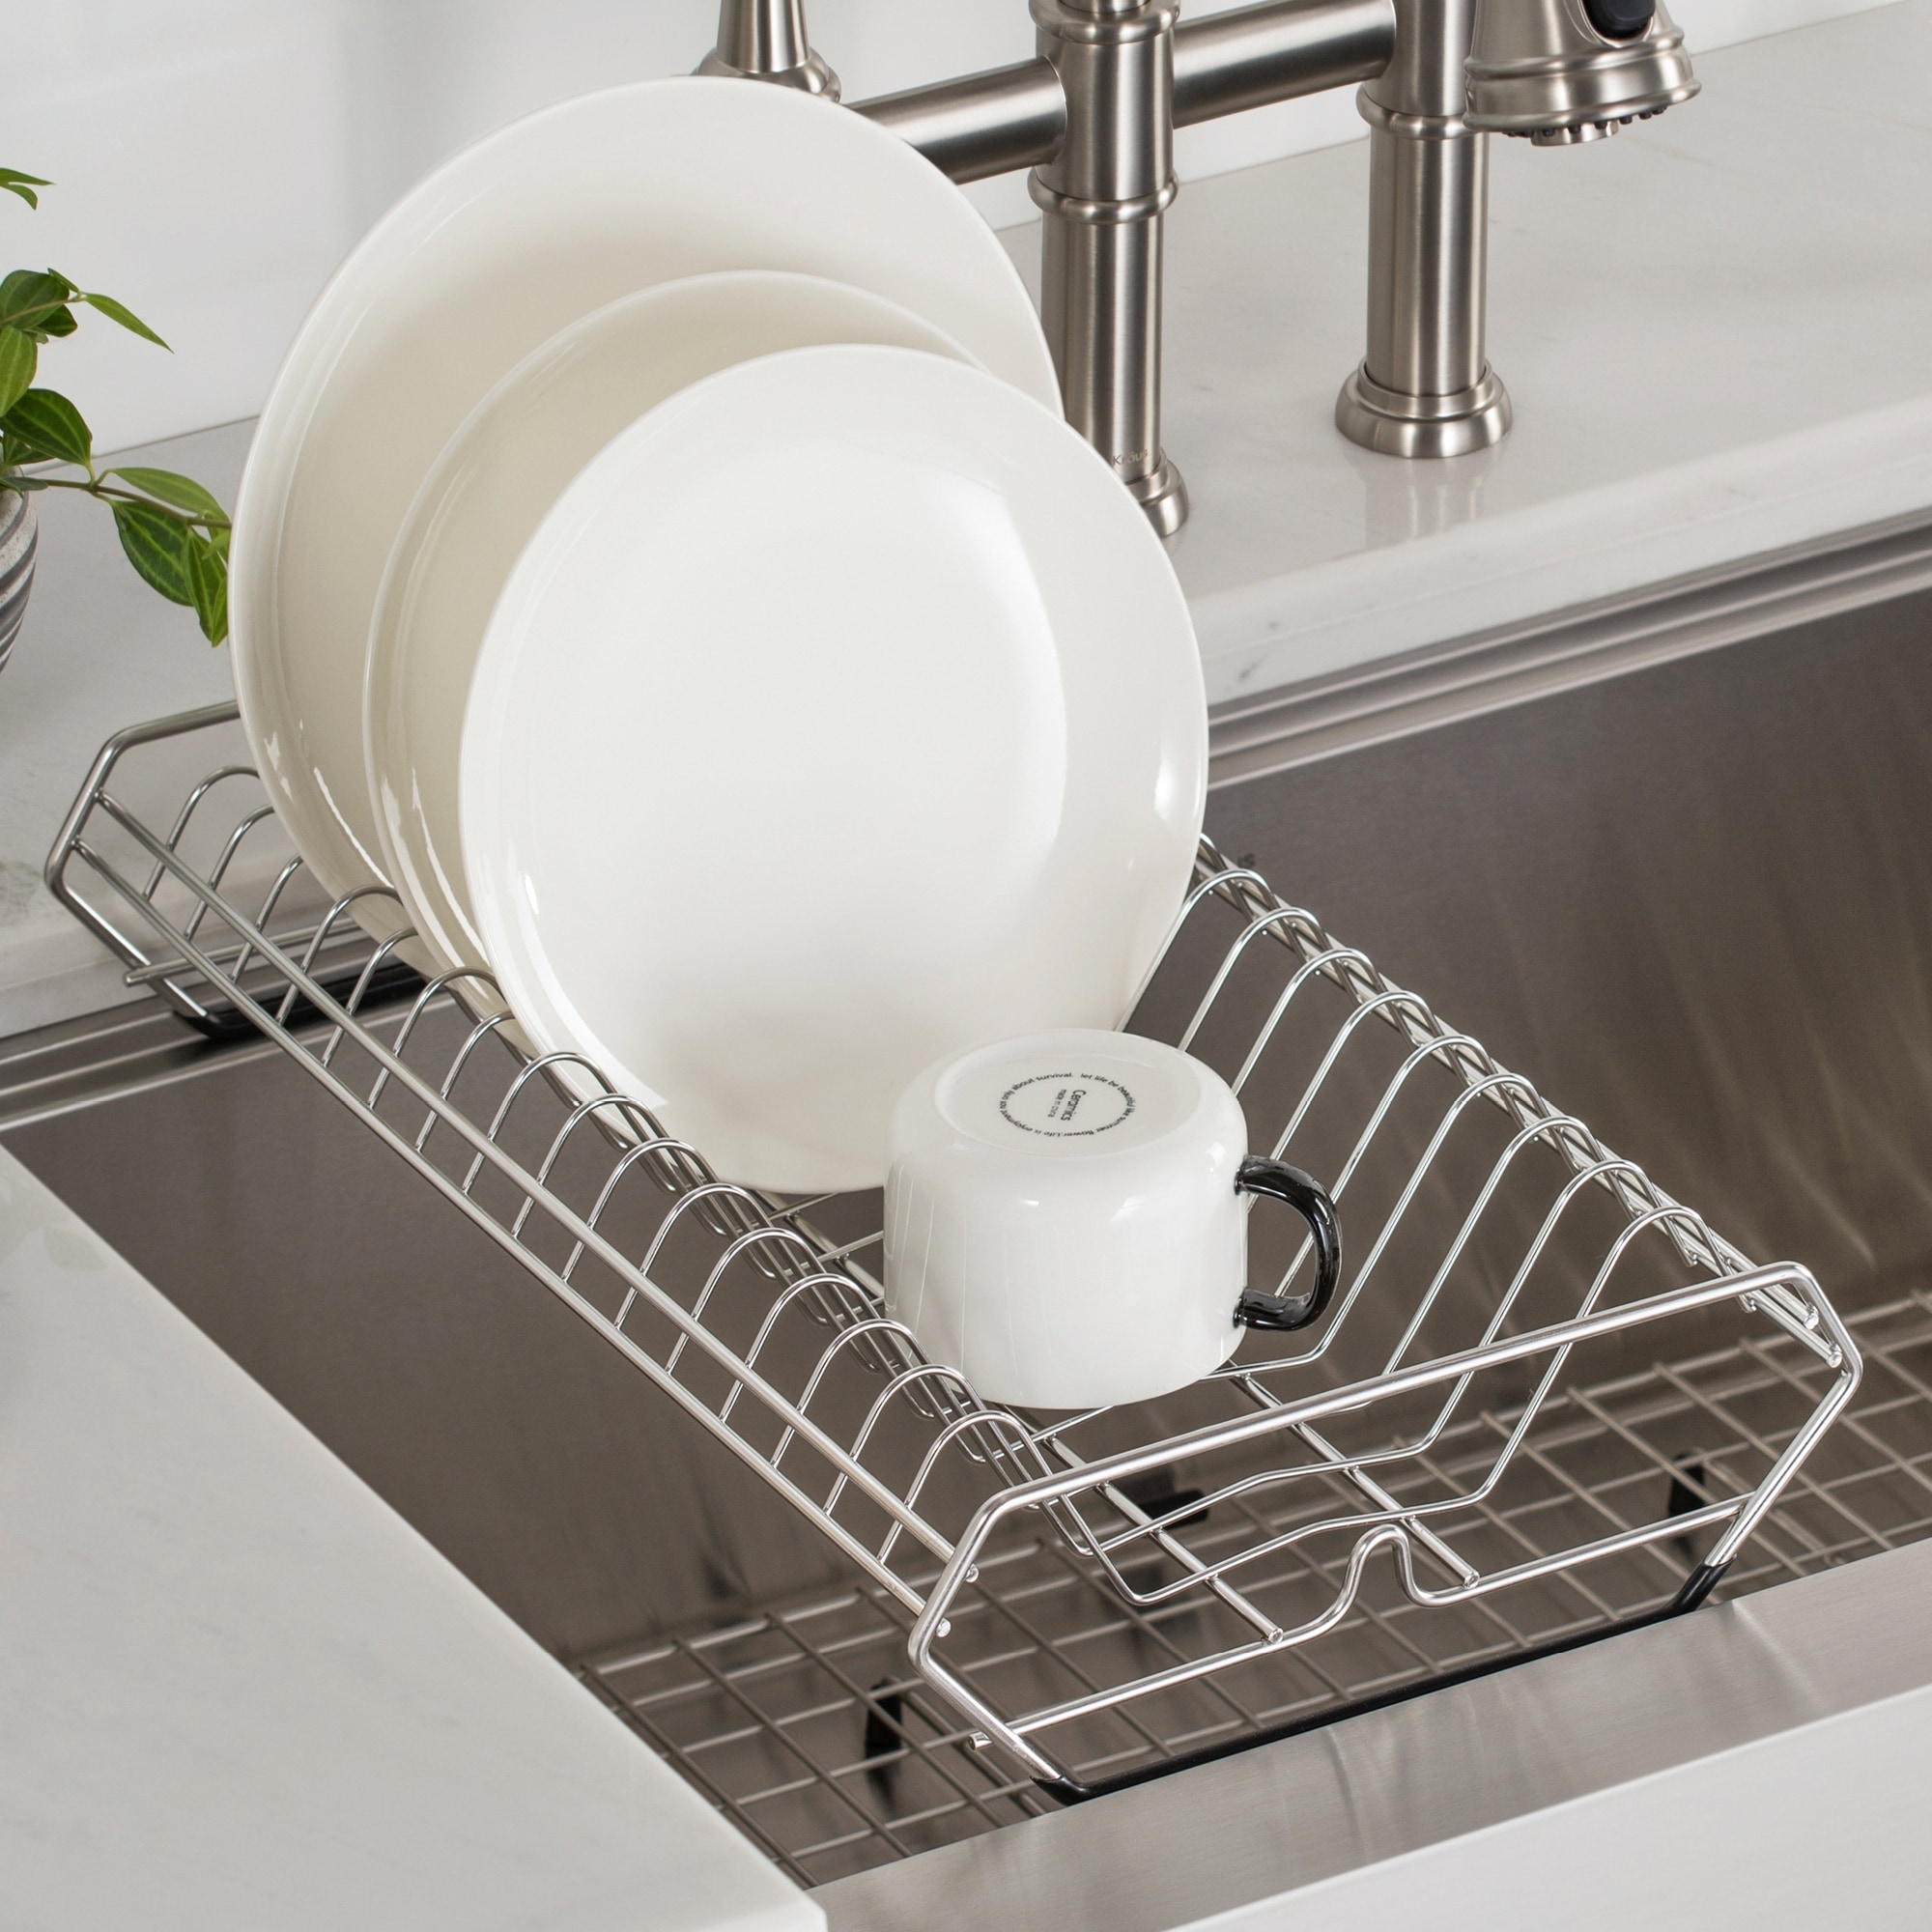 https://ak1.ostkcdn.com/images/products/is/images/direct/0b1ea375072aa5e9e7d509e56483fe2735371fa5/KRAUS-Workstation-Kitchen-Sink-Dish-Drying-Rack-in-Stainless-Steel.jpg